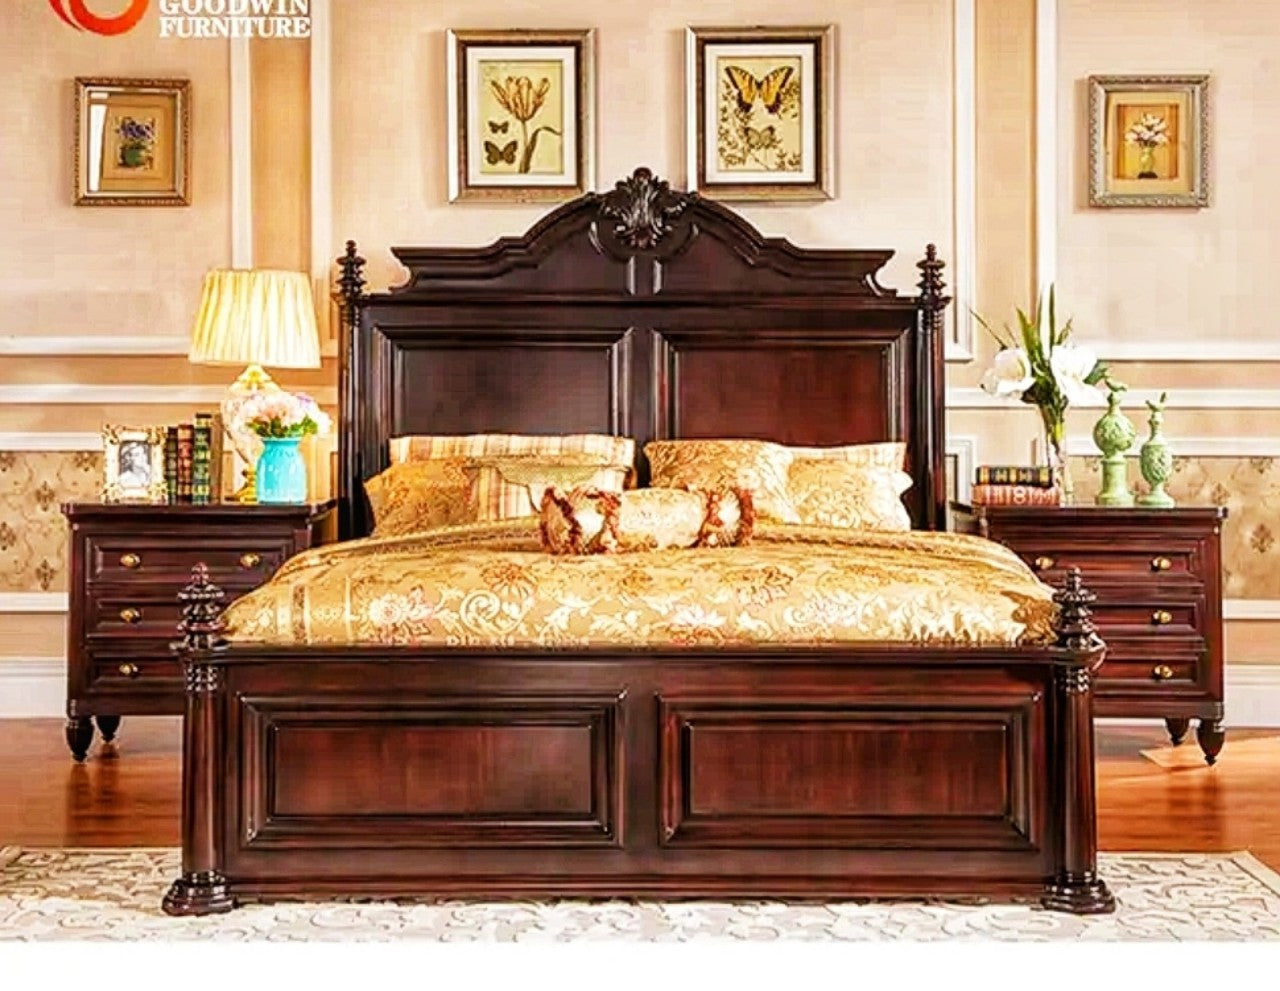 King sized solid birchwood bed